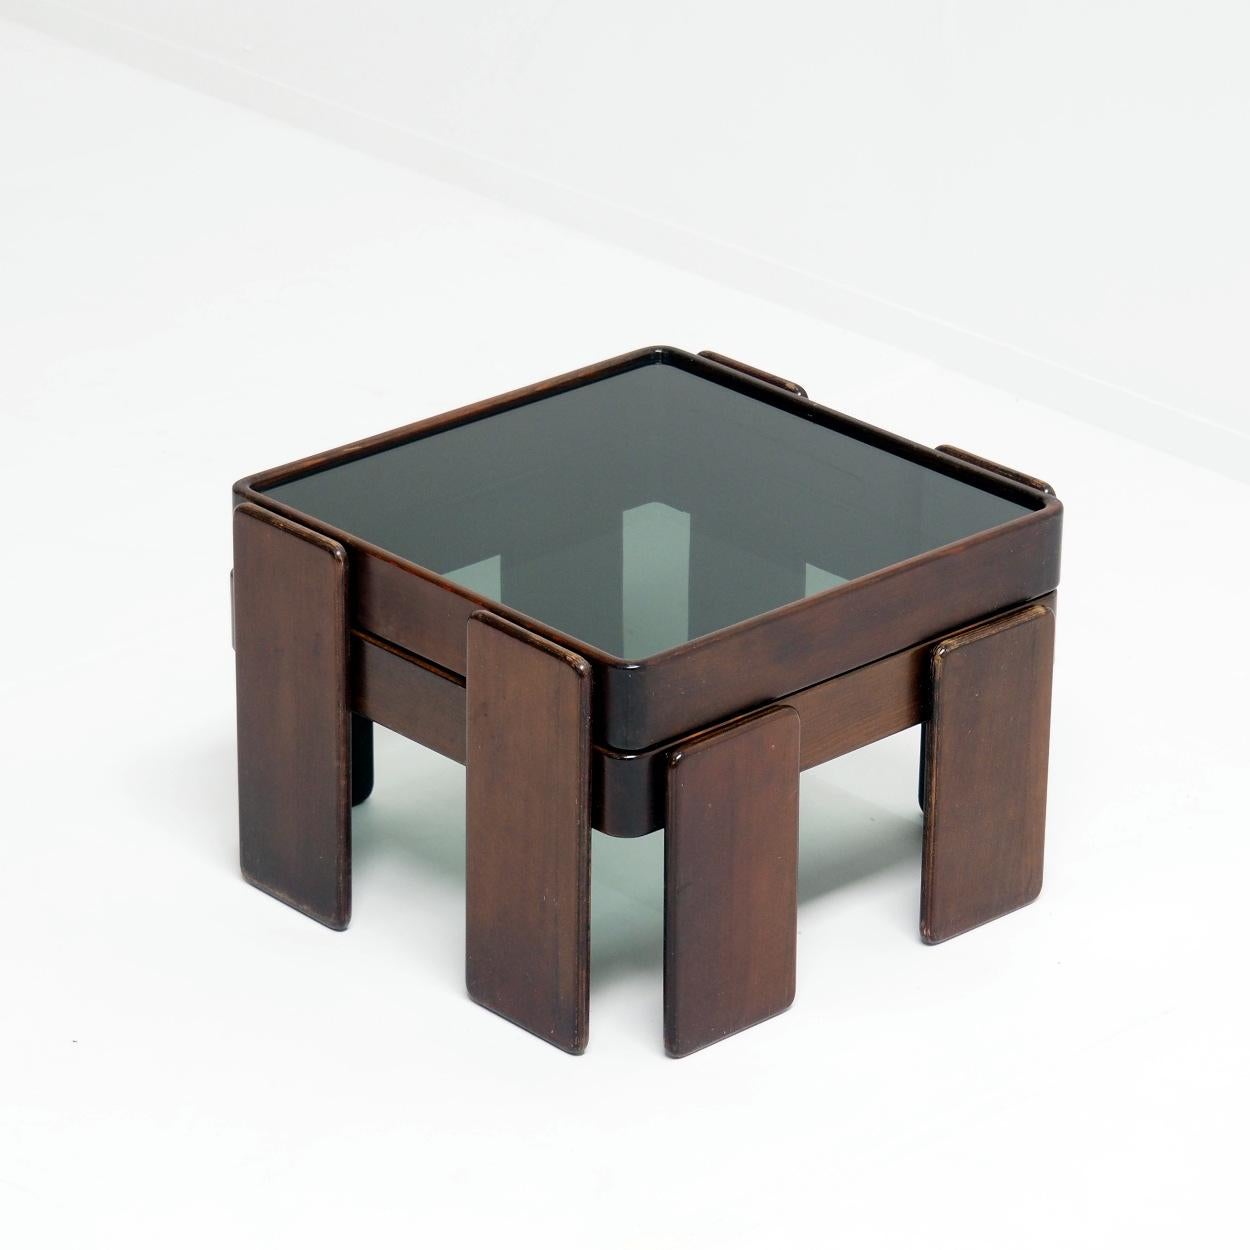 Italian 1960s Coffee Table Designed by Gianfranco Frattini for Cassina